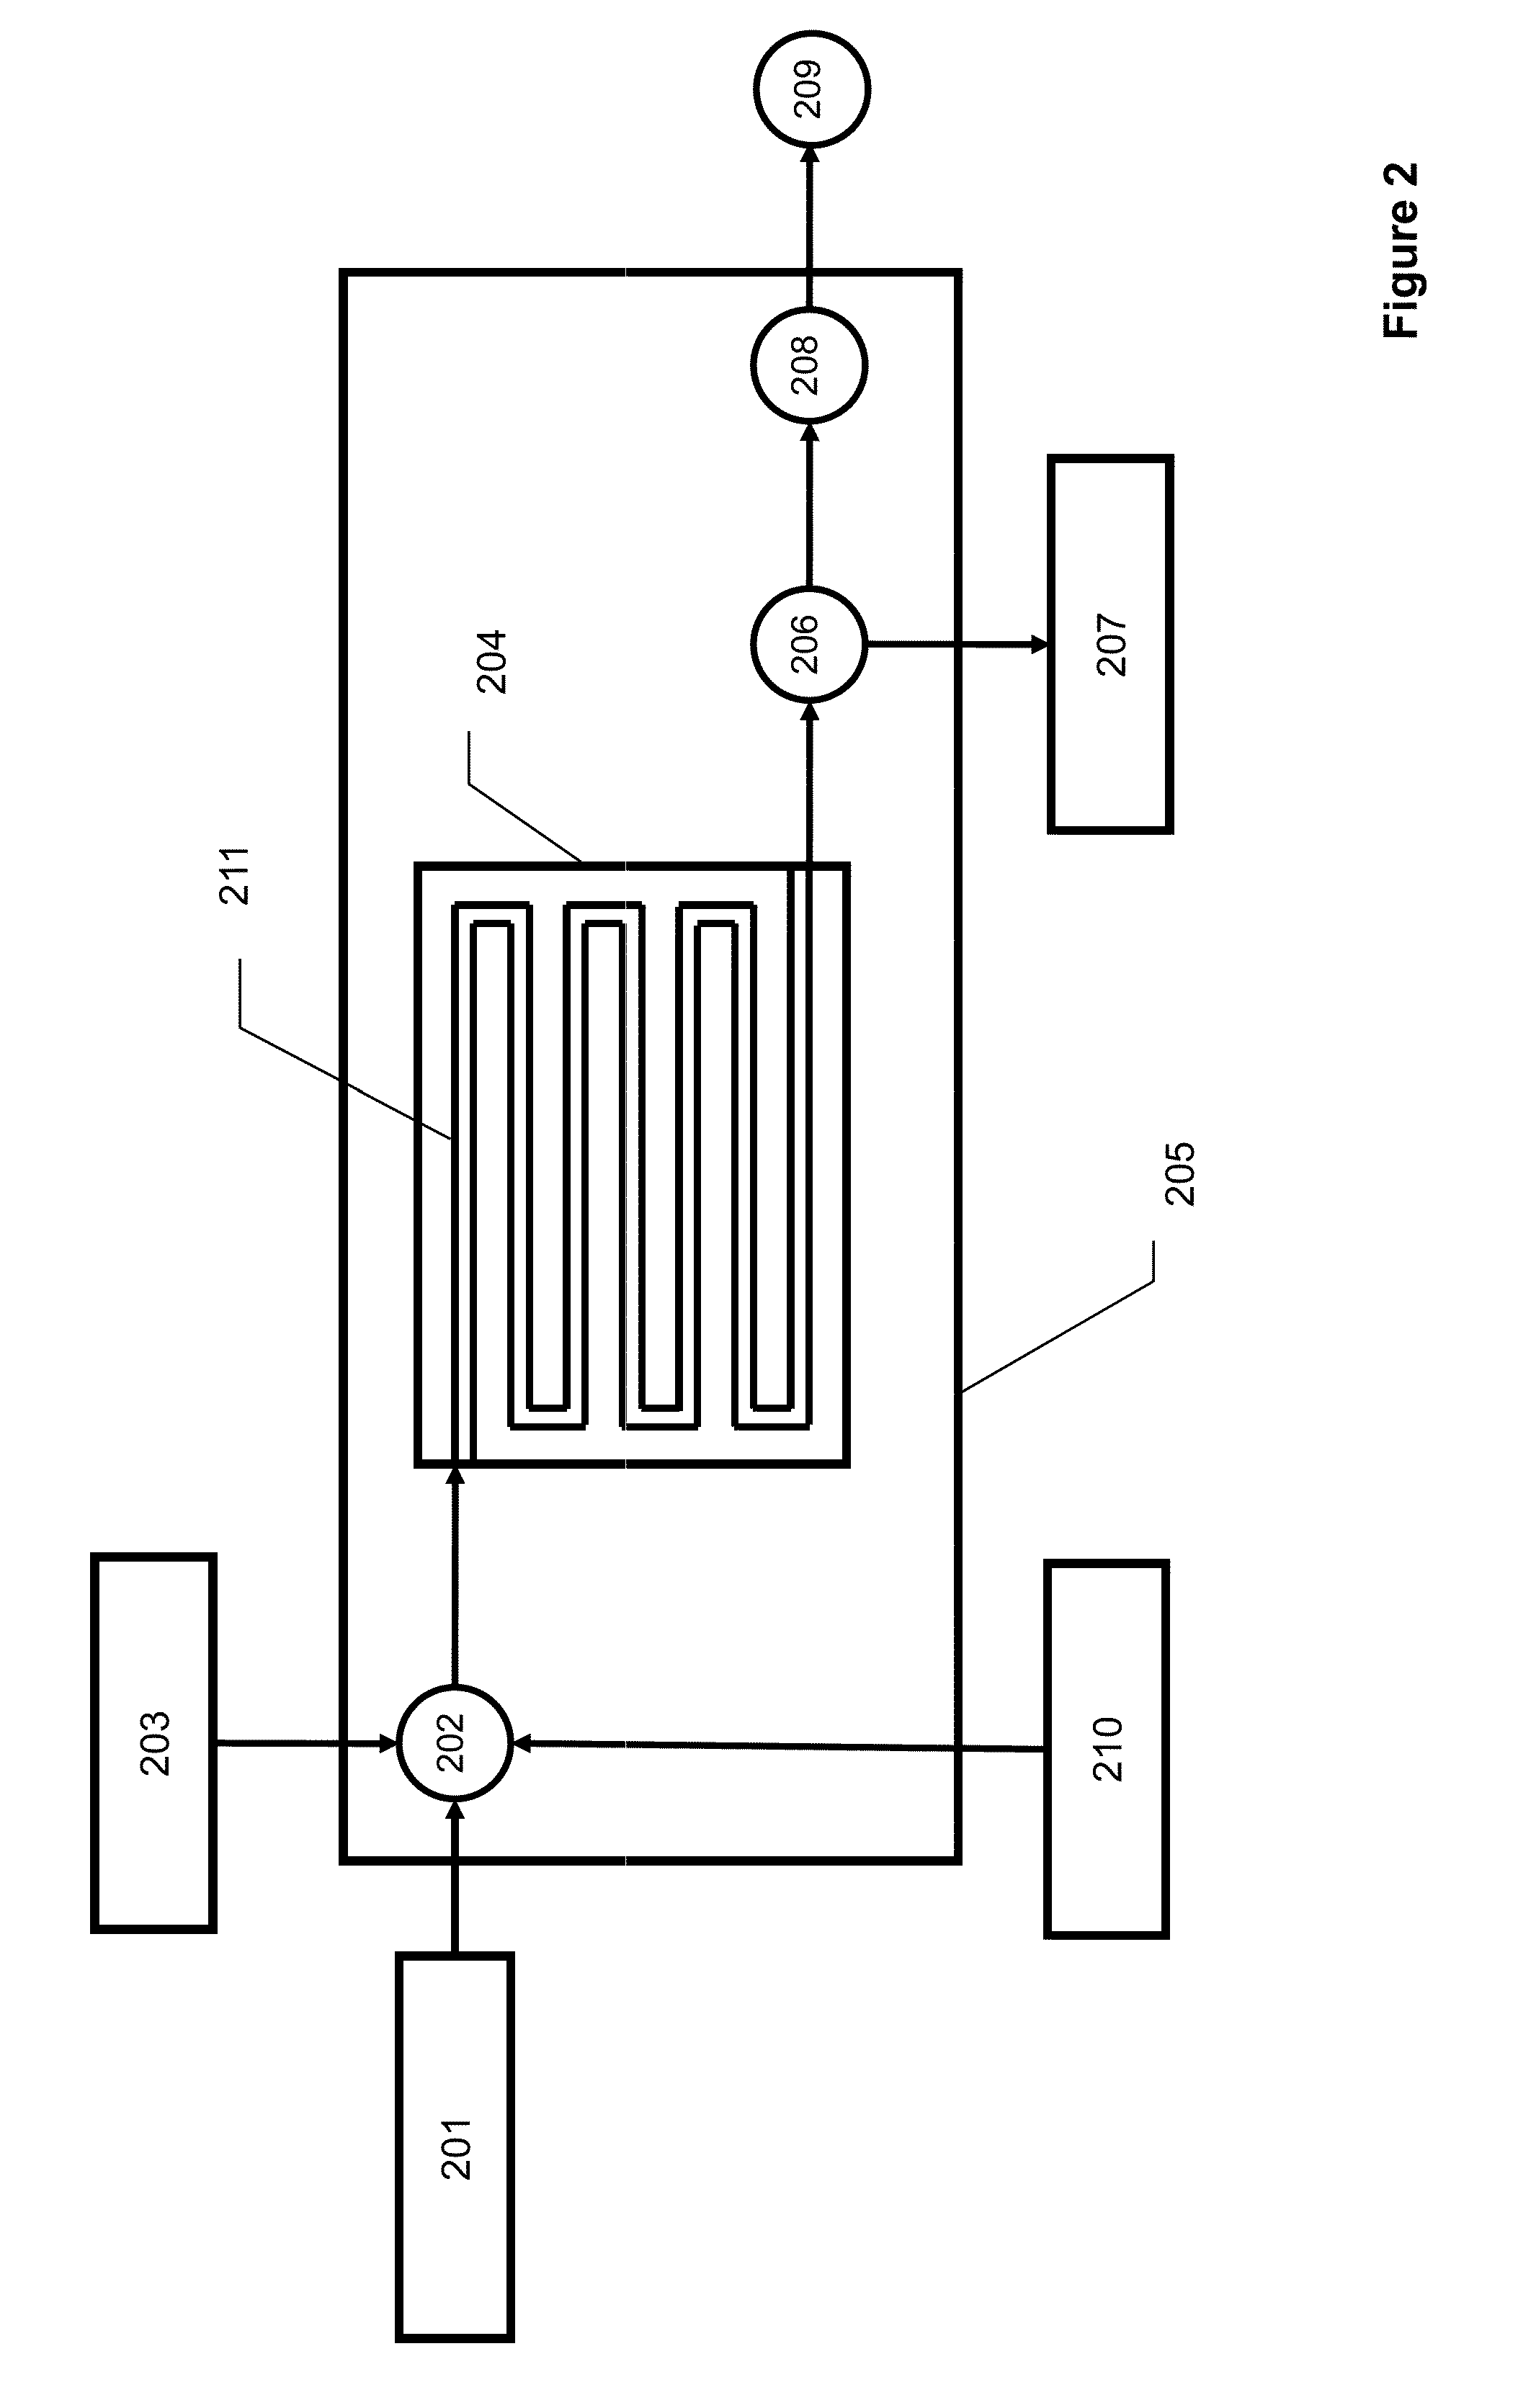 Microengineered Supercritical Fluid Chromatography System